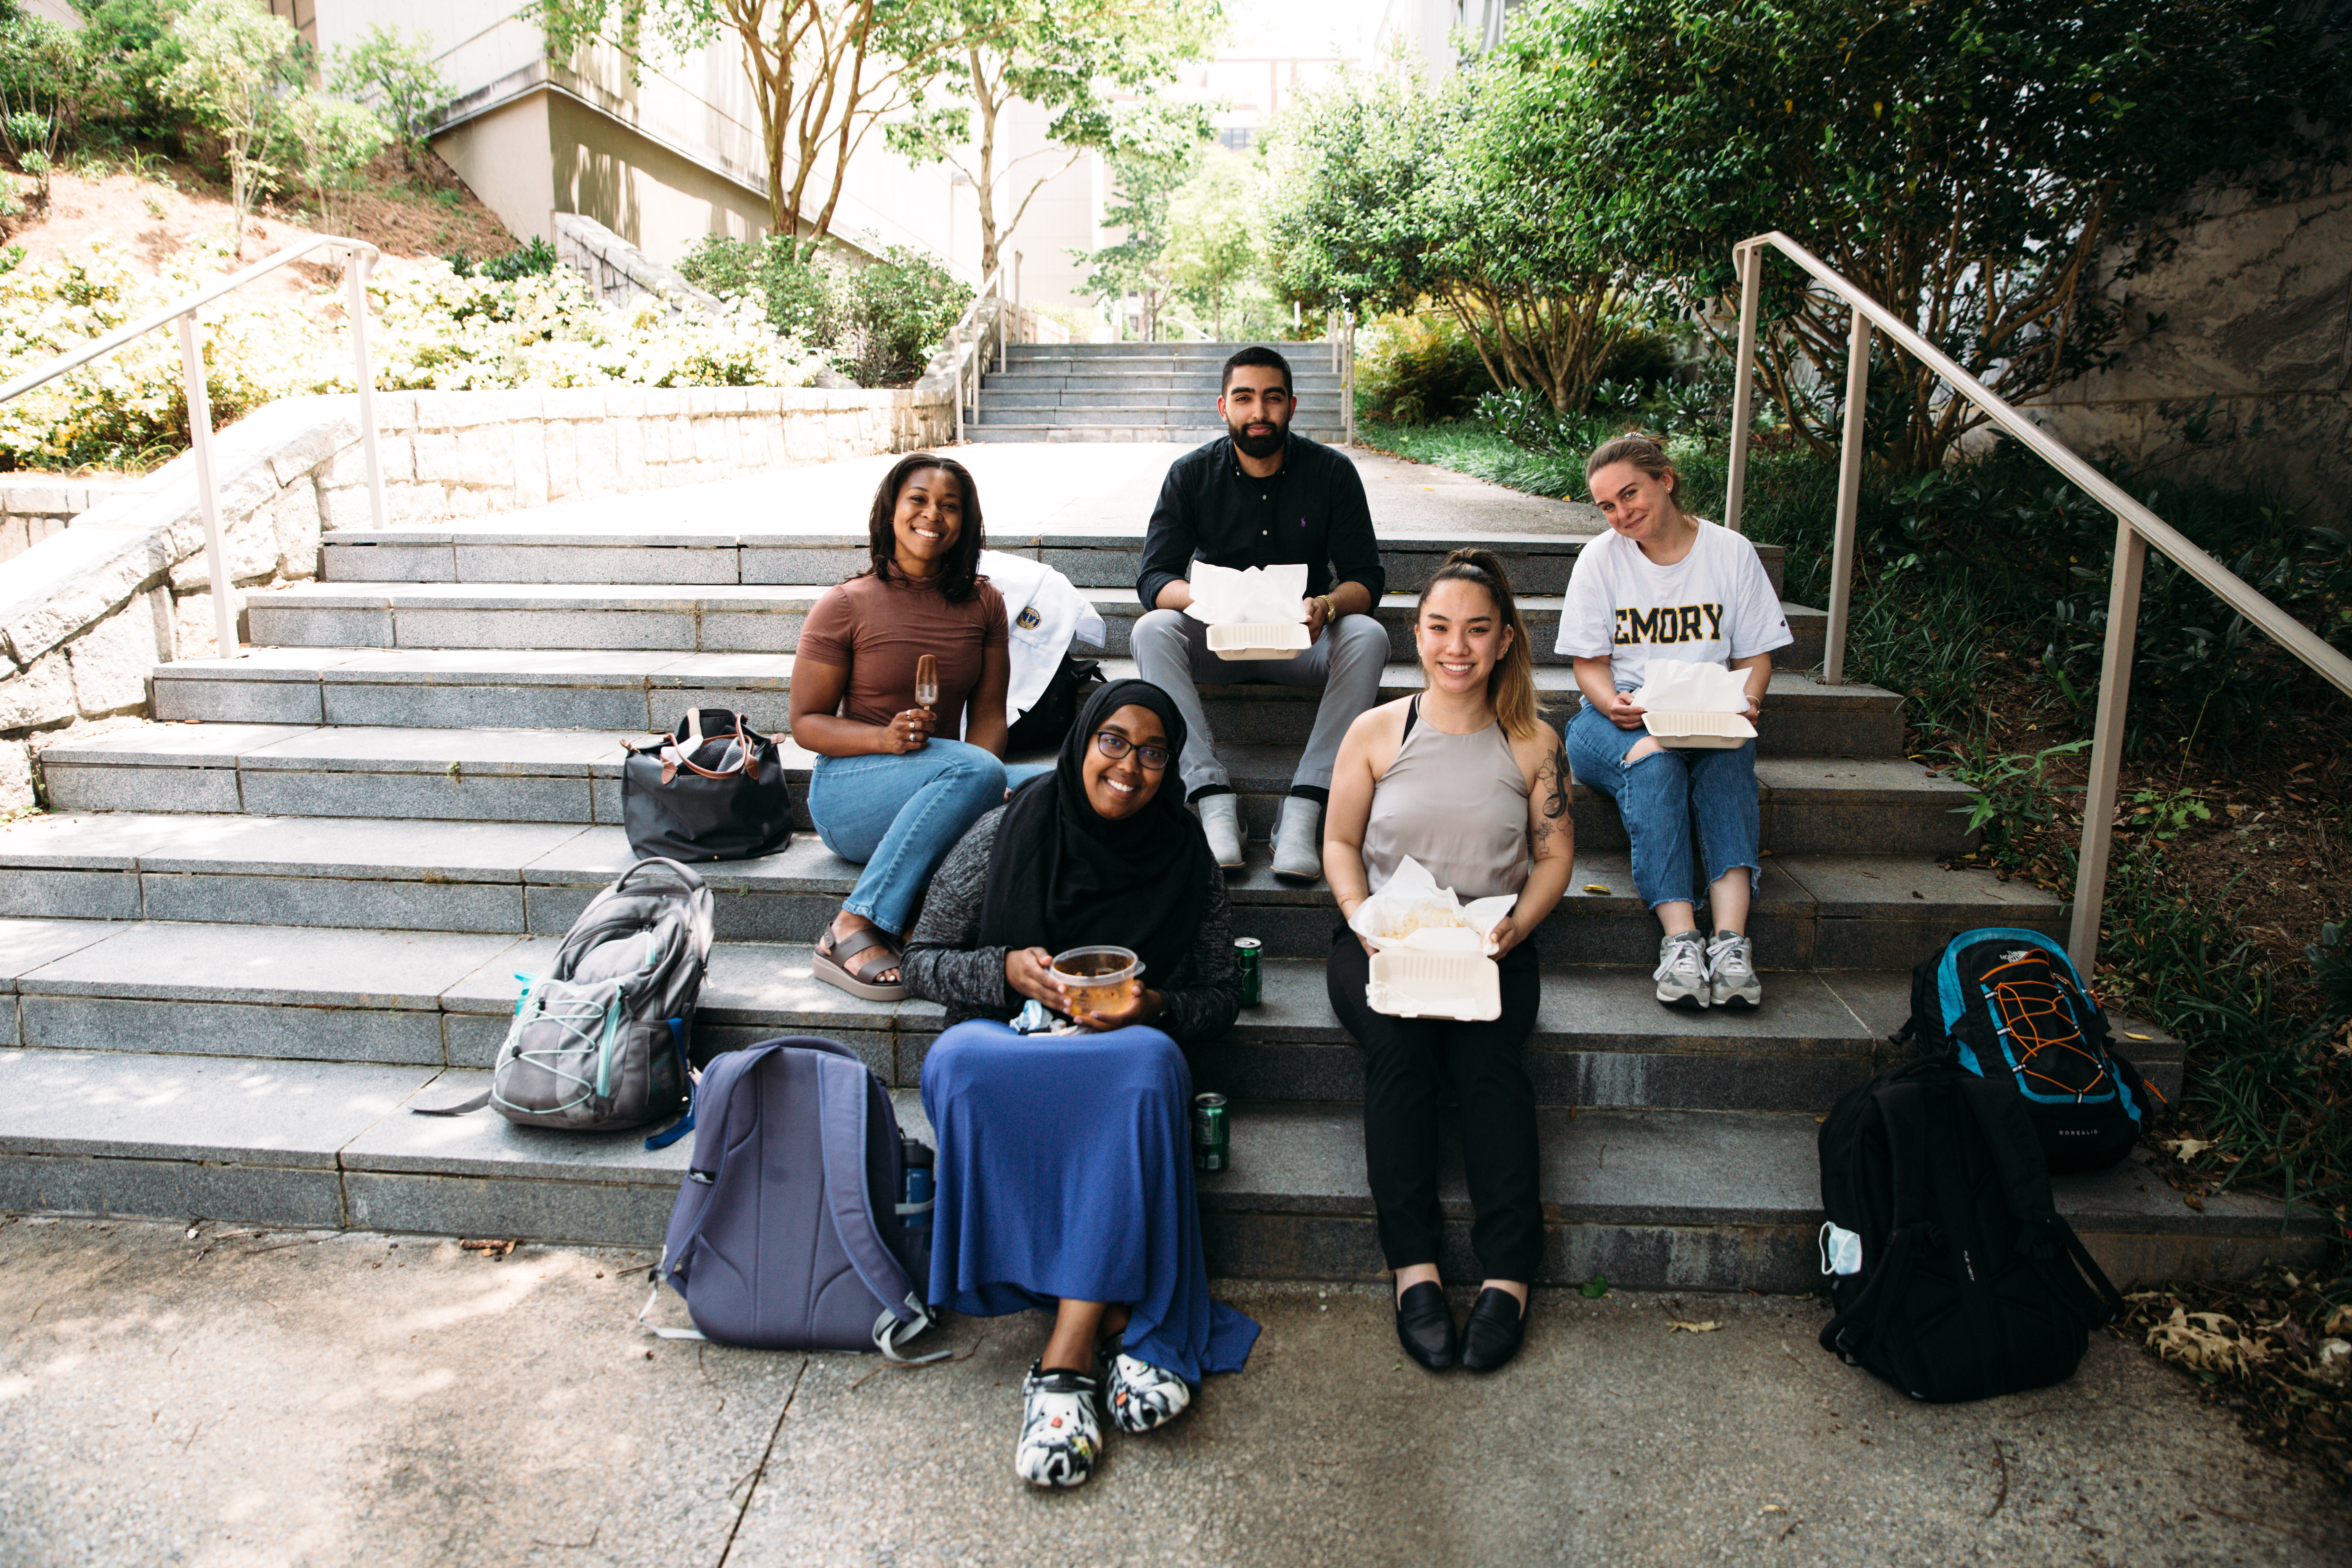 Group of students on steps eating together